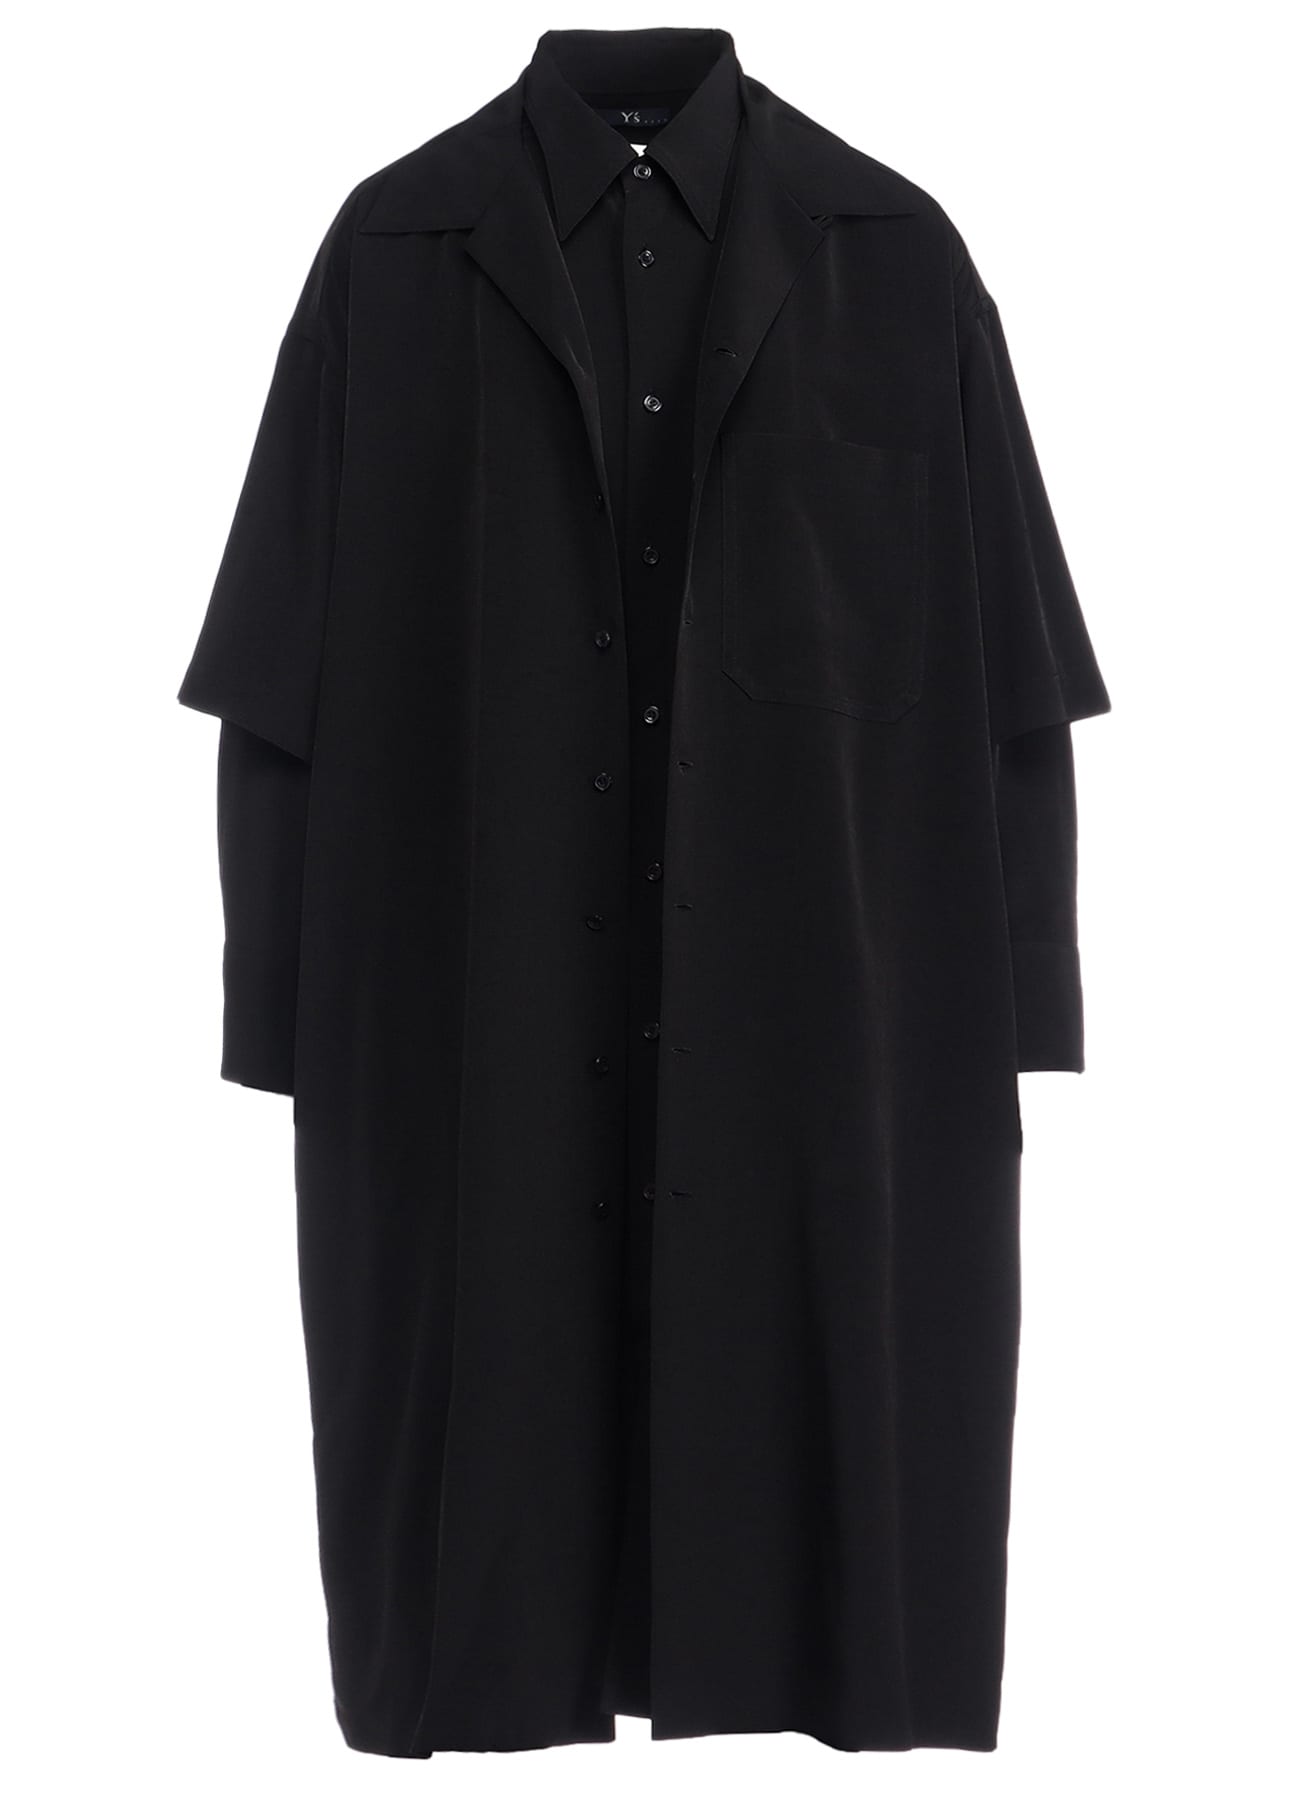 【8/7 12:00 Release】TRIACETATE/POLYESTER DOUBLE LAYERED LONG SHIRT